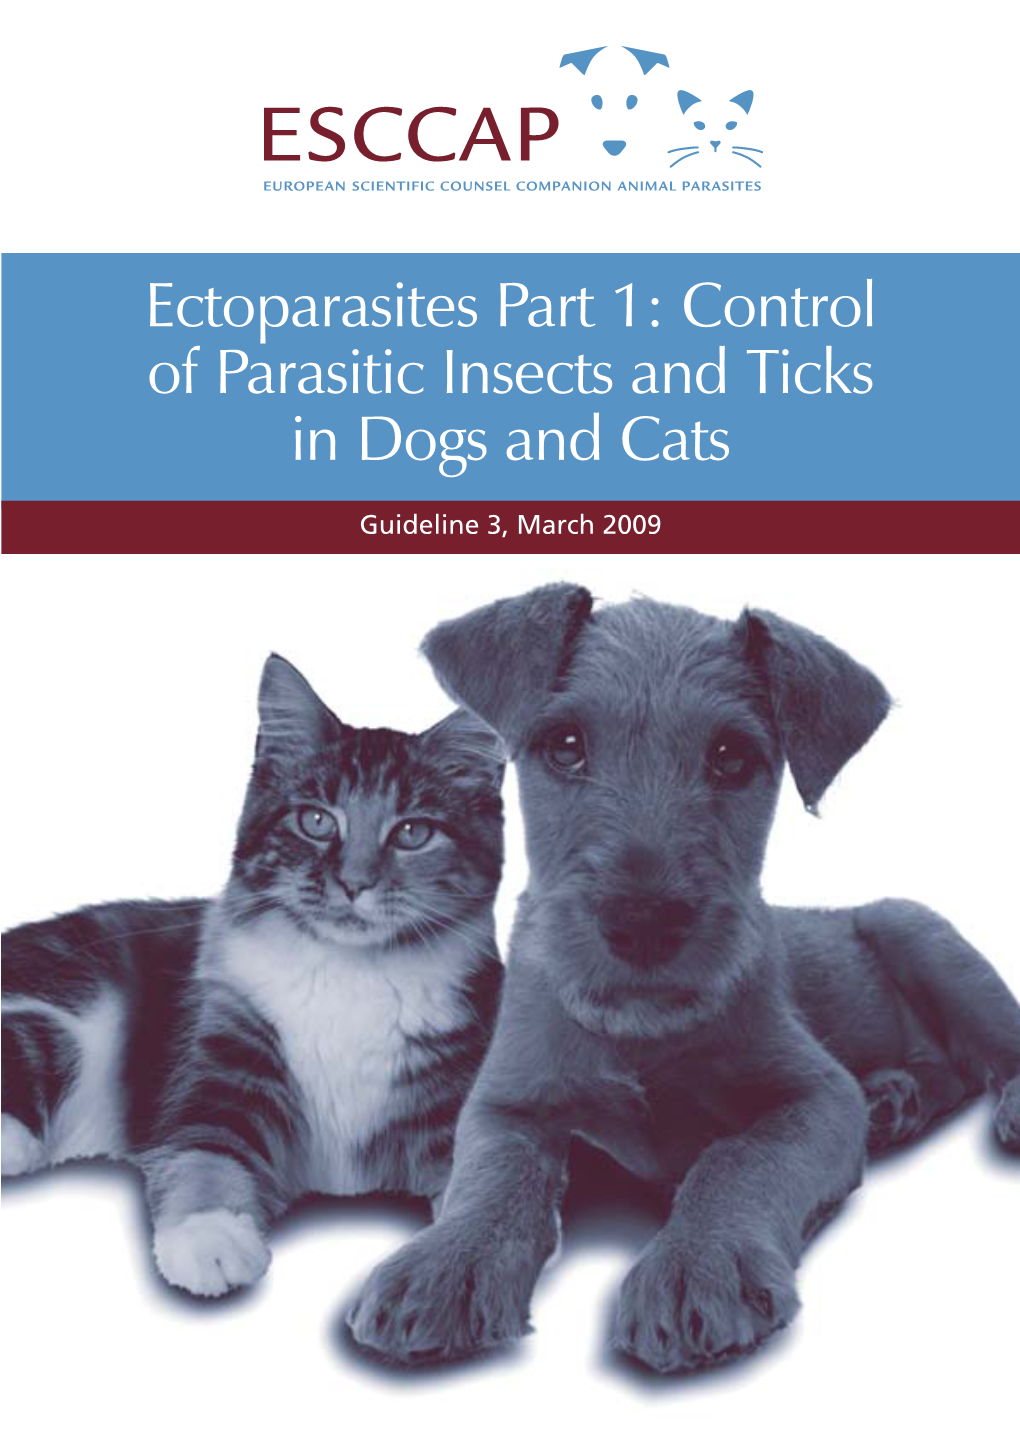 Ectoparasites Part 1: Control of Parasitic Insects and Ticks in Dogs and Cats